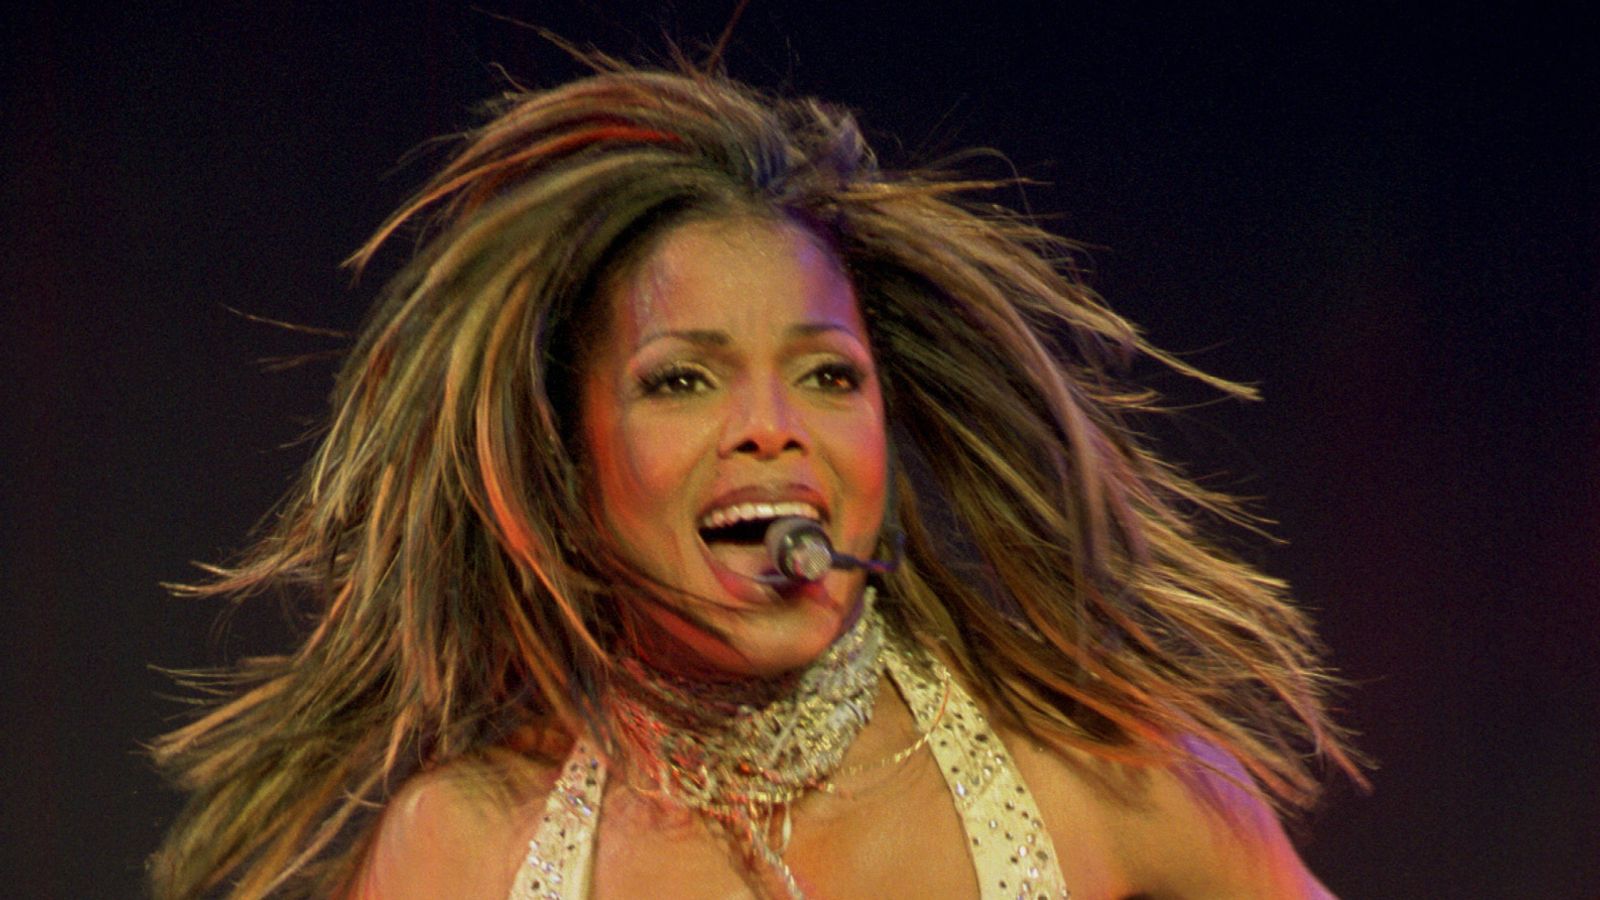 Microsoft reveals Janet Jackson song had the power to crash laptops - even if it wasn't playing on them | Science & Tech News